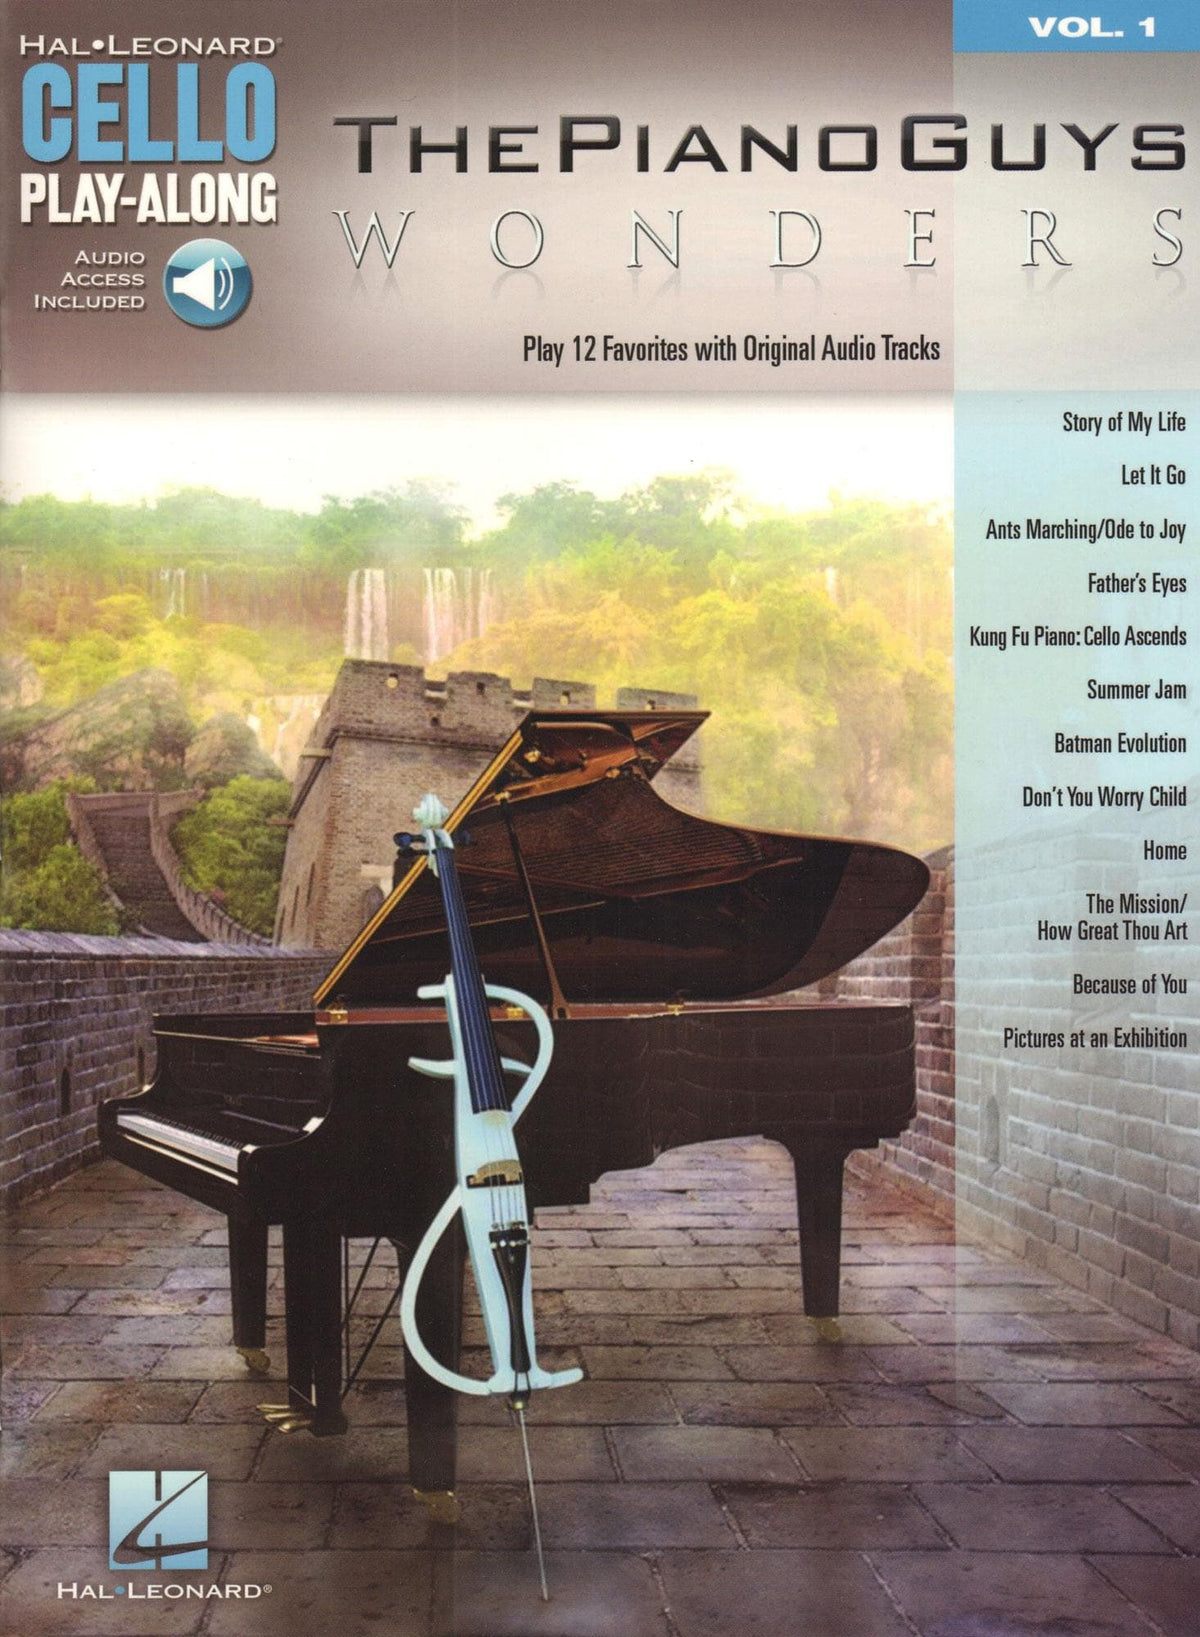 The Piano Guys Wonders - Cello Play-Along Vol. 1 - 12 Favorites - for Cello and Audio Accompaniment - Hal Leonard